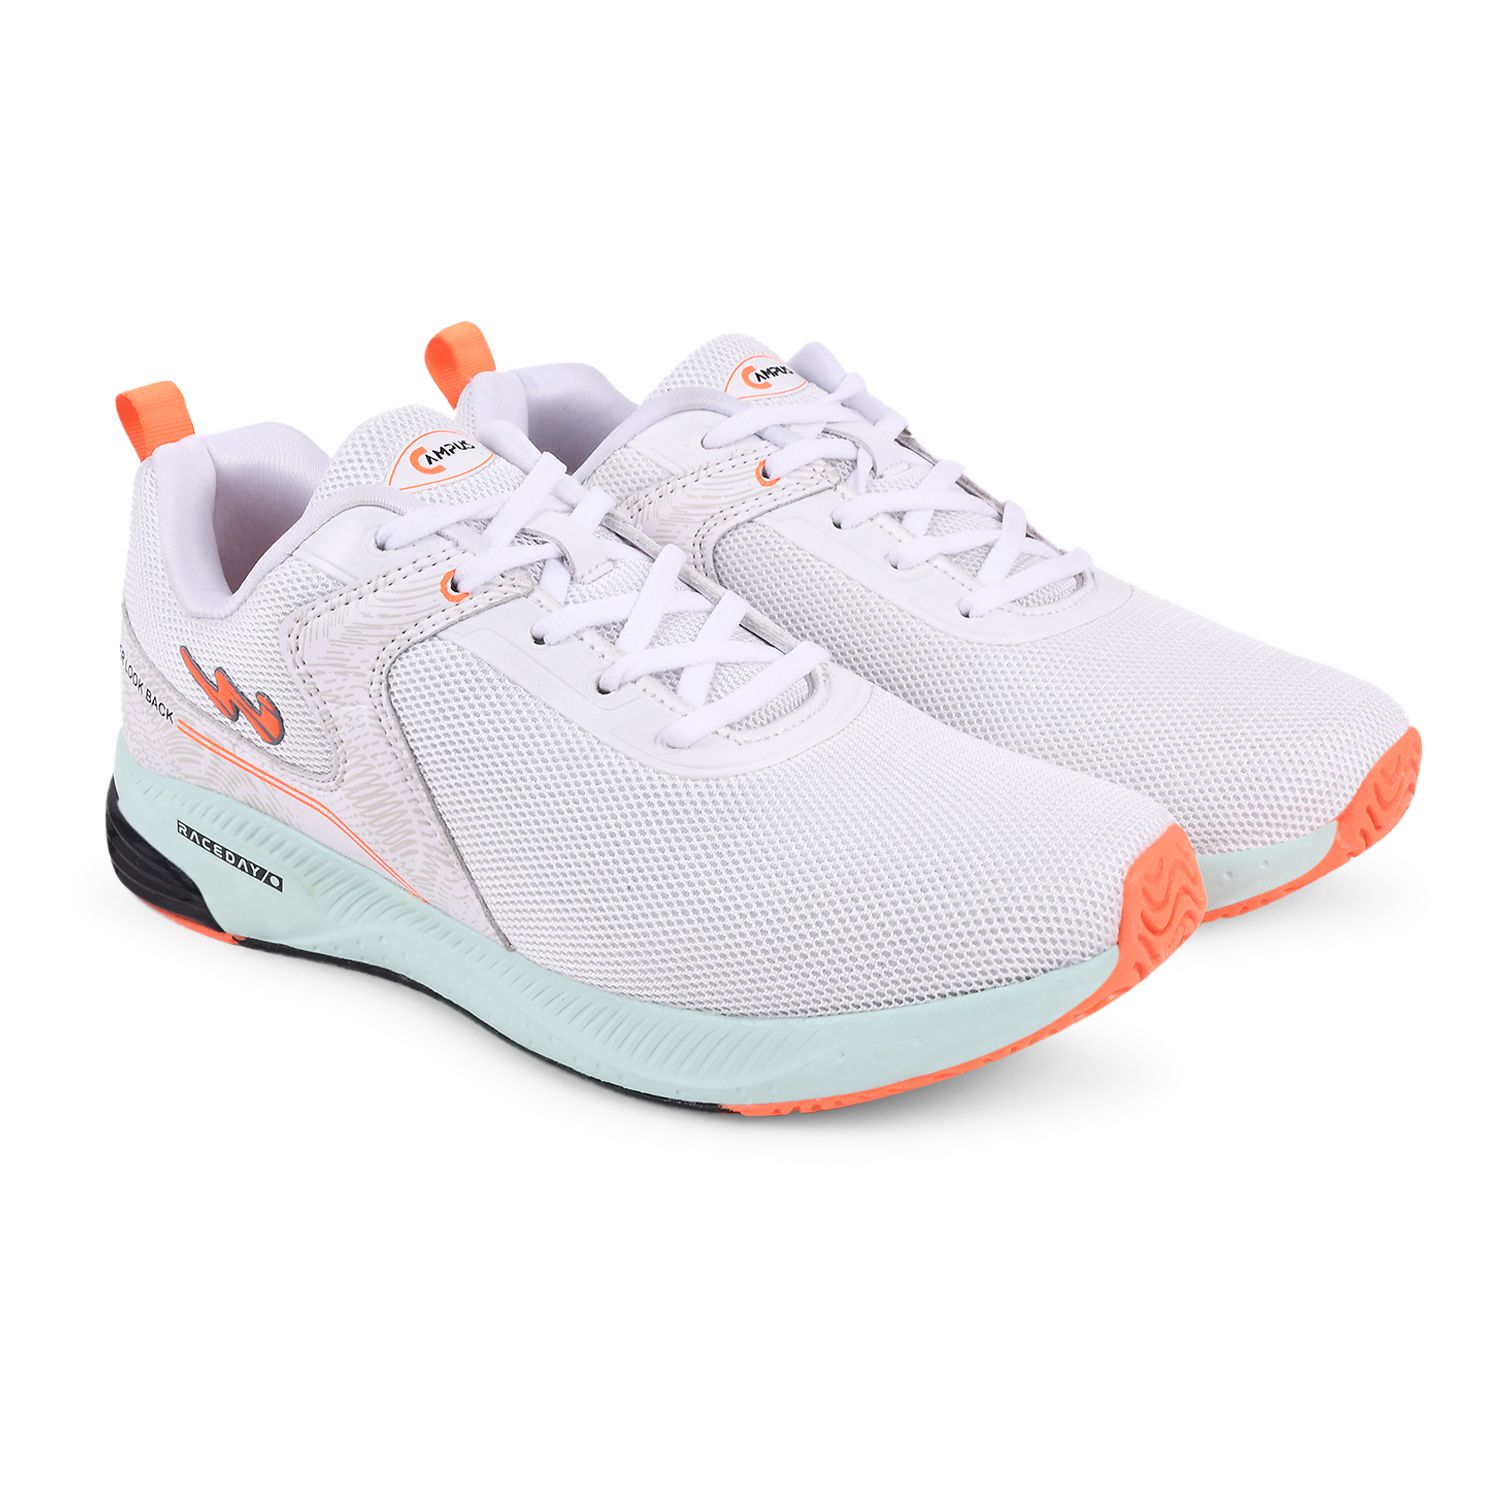     			Campus - CAMP-SLASHER White Men's Sports Running Shoes